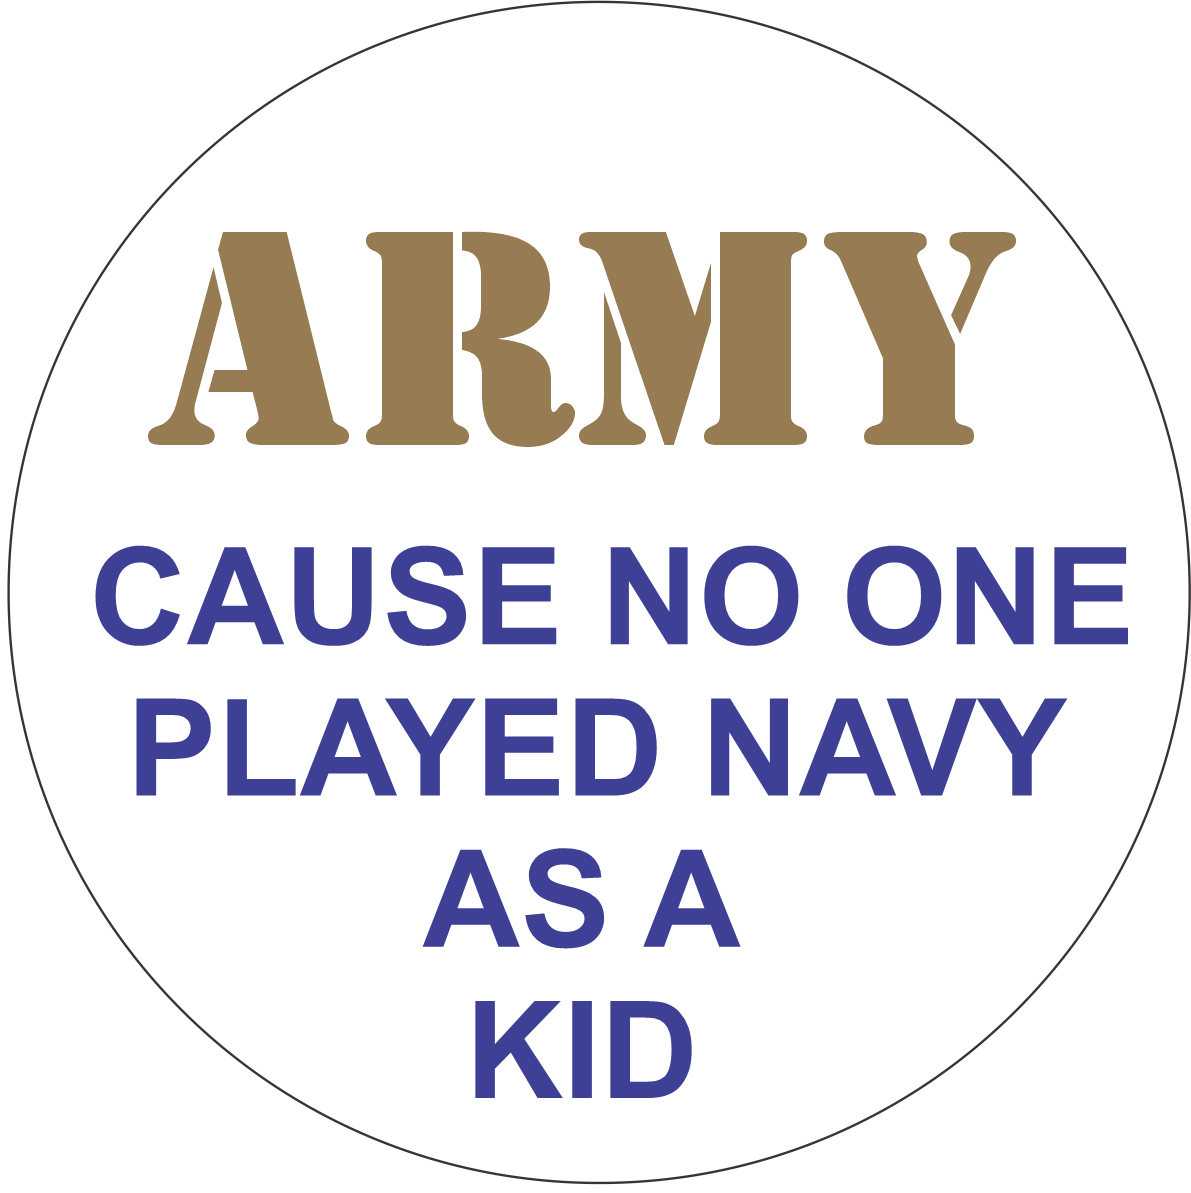 ARMY cause no one played Navy as a Kid